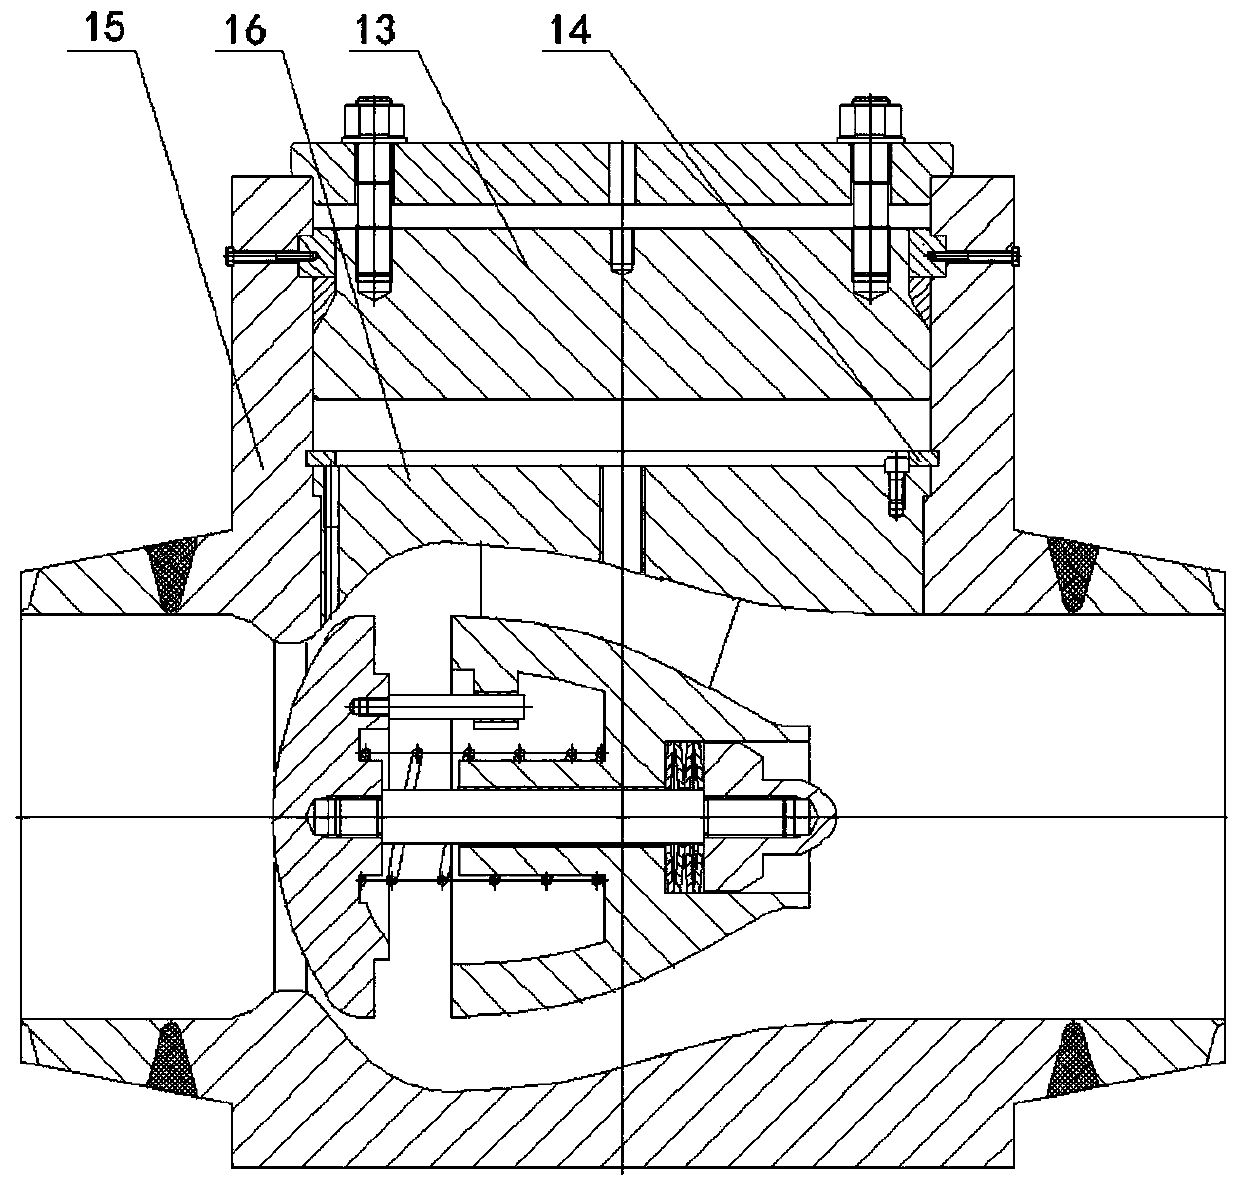 An Axial Flow Check Valve with Online Maintenance